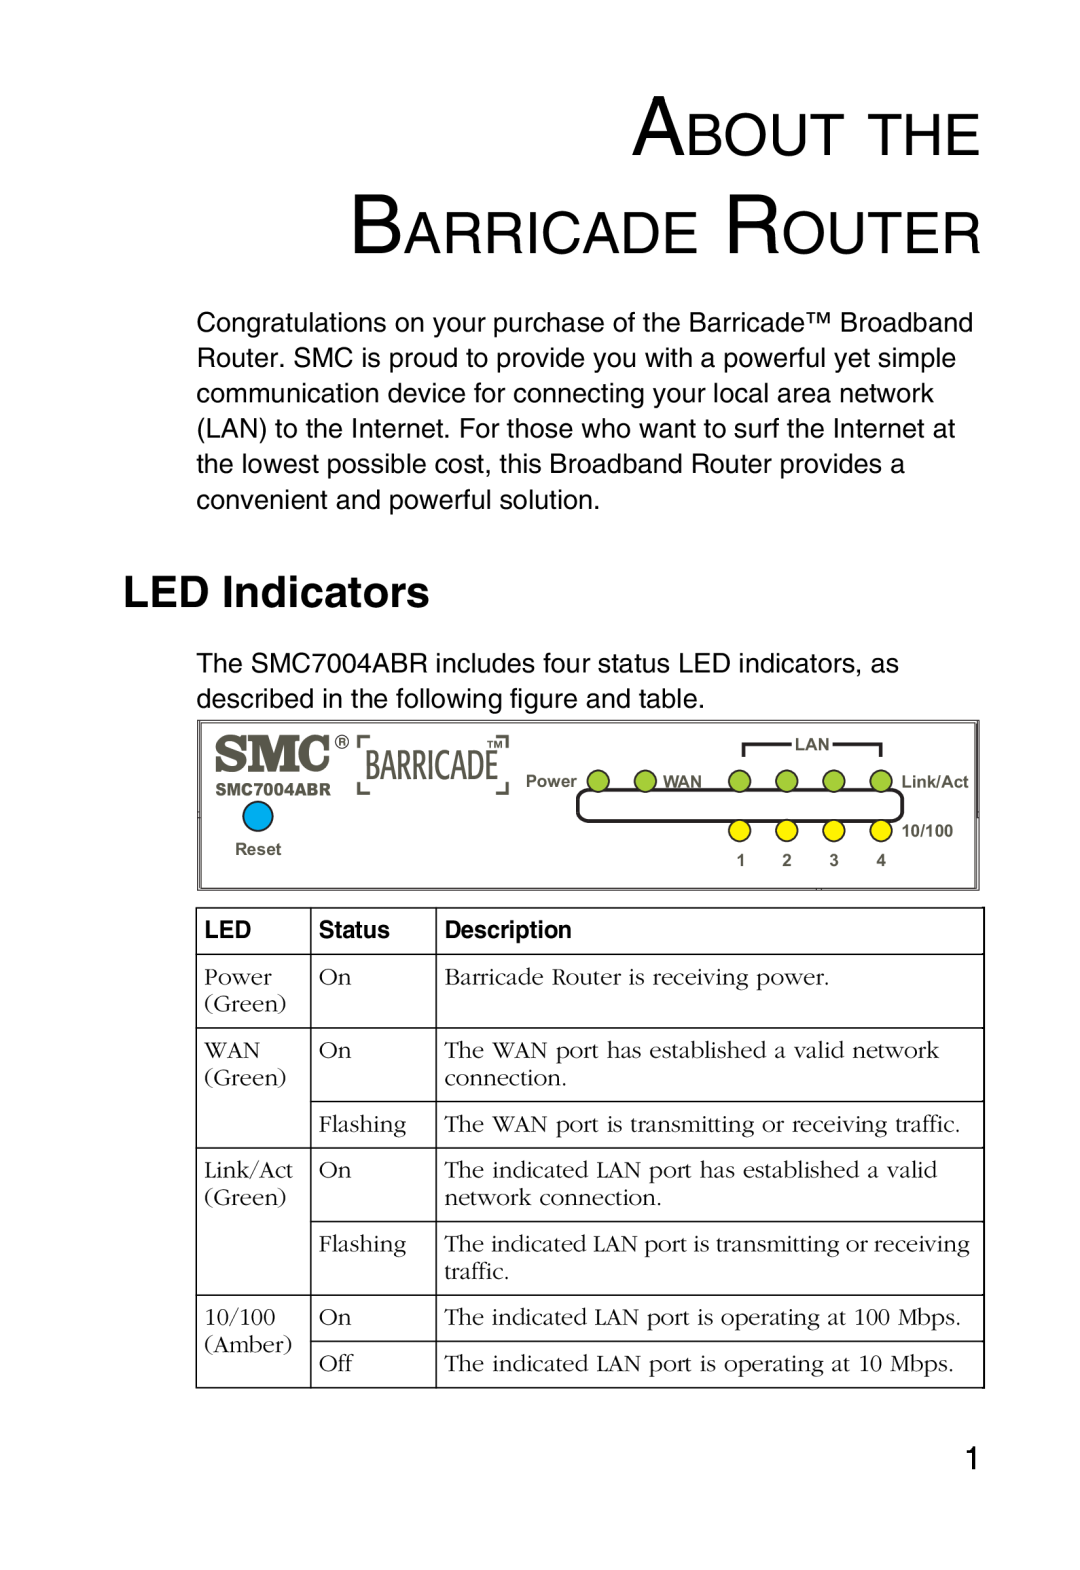 Sharp S M C 7 0 0 4 A B R, SMC7004ABR manual About The Barricade Router, LED Indicators 